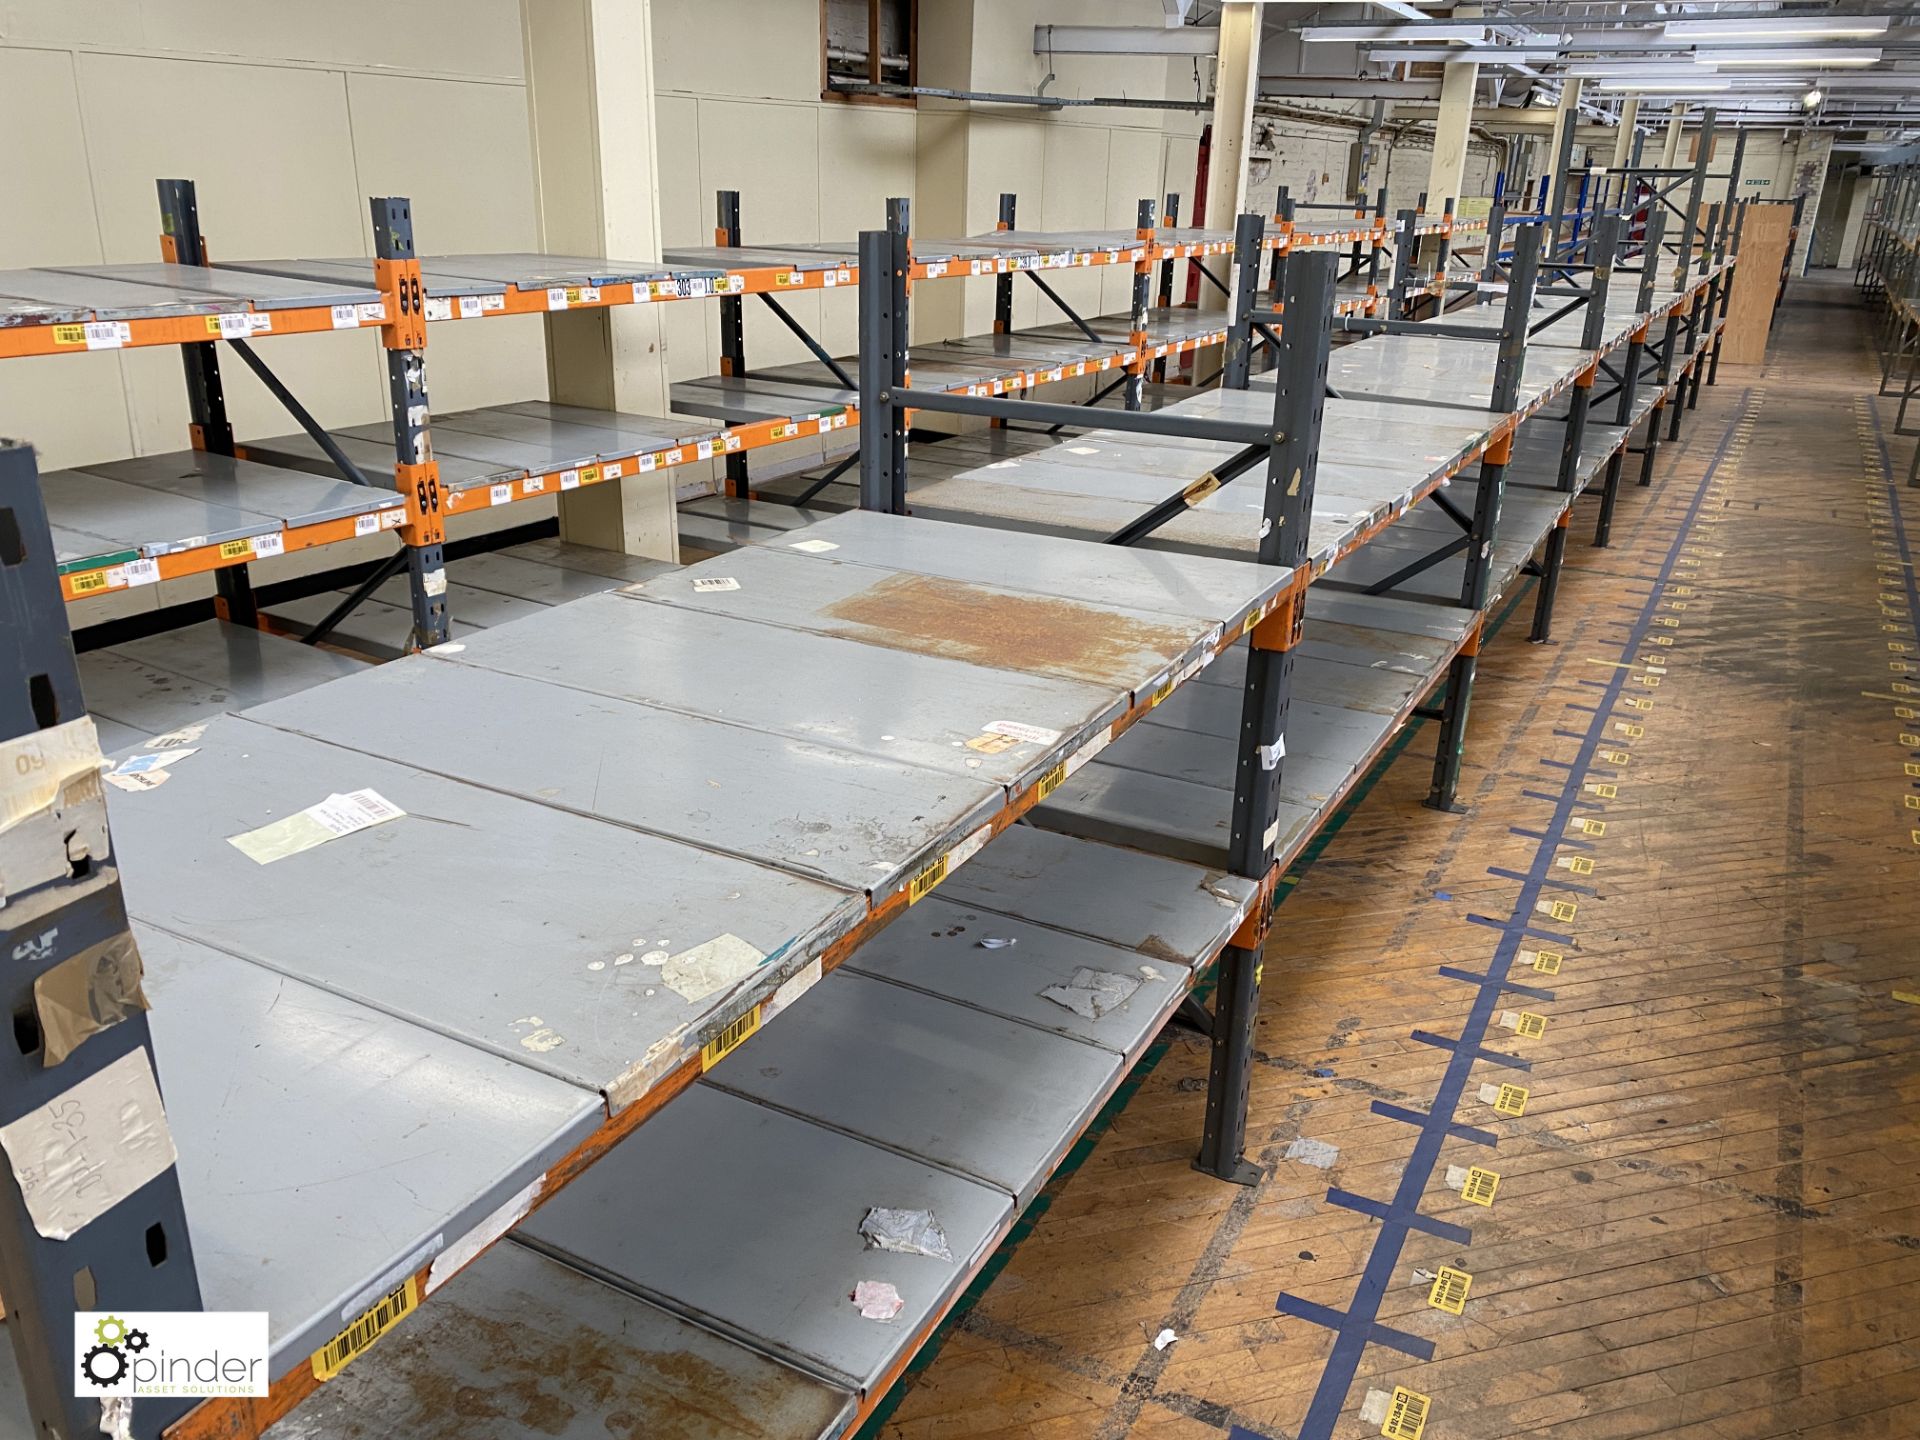 8 bays Dexion Speedlock Racking comprising 9 uprights approx 1840mm x 910mm wide, 32 beams 2120mm, - Image 4 of 6